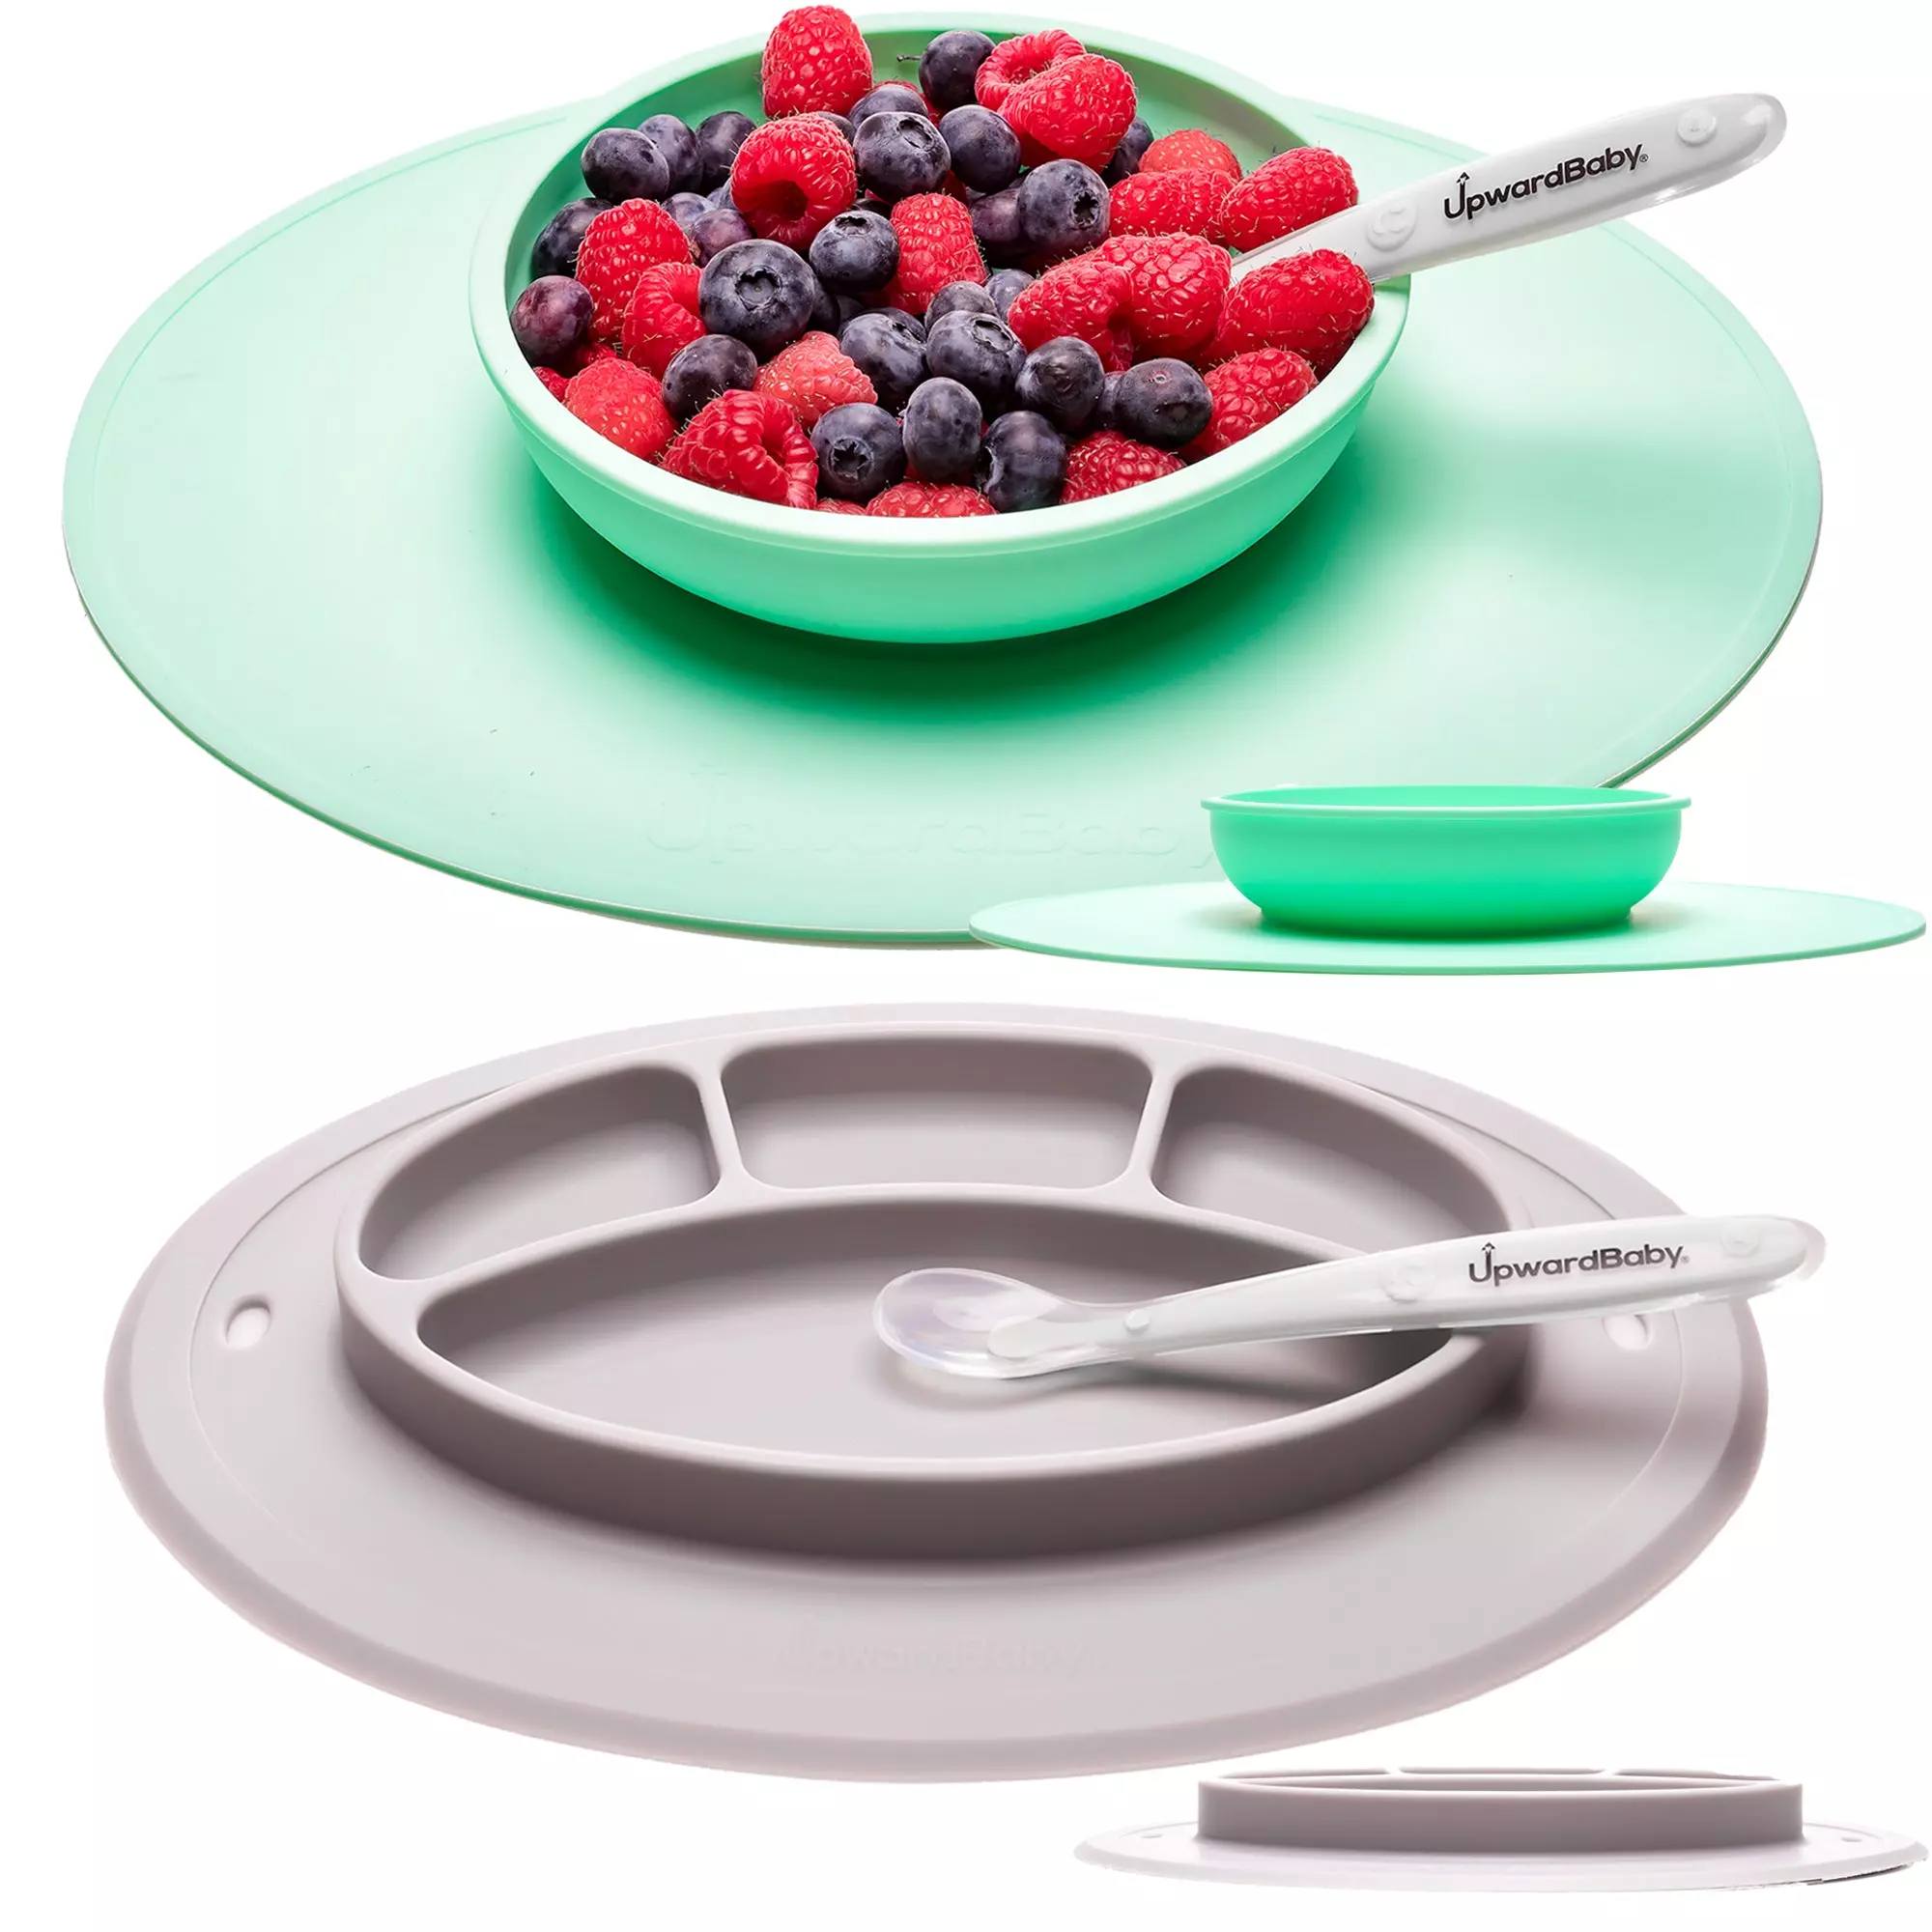 https://www.momjunction.com/wp-content/uploads/product-images/upwardbaby-suction-baby-bowls-and-plate-placemats_afl2931.jpg.webp